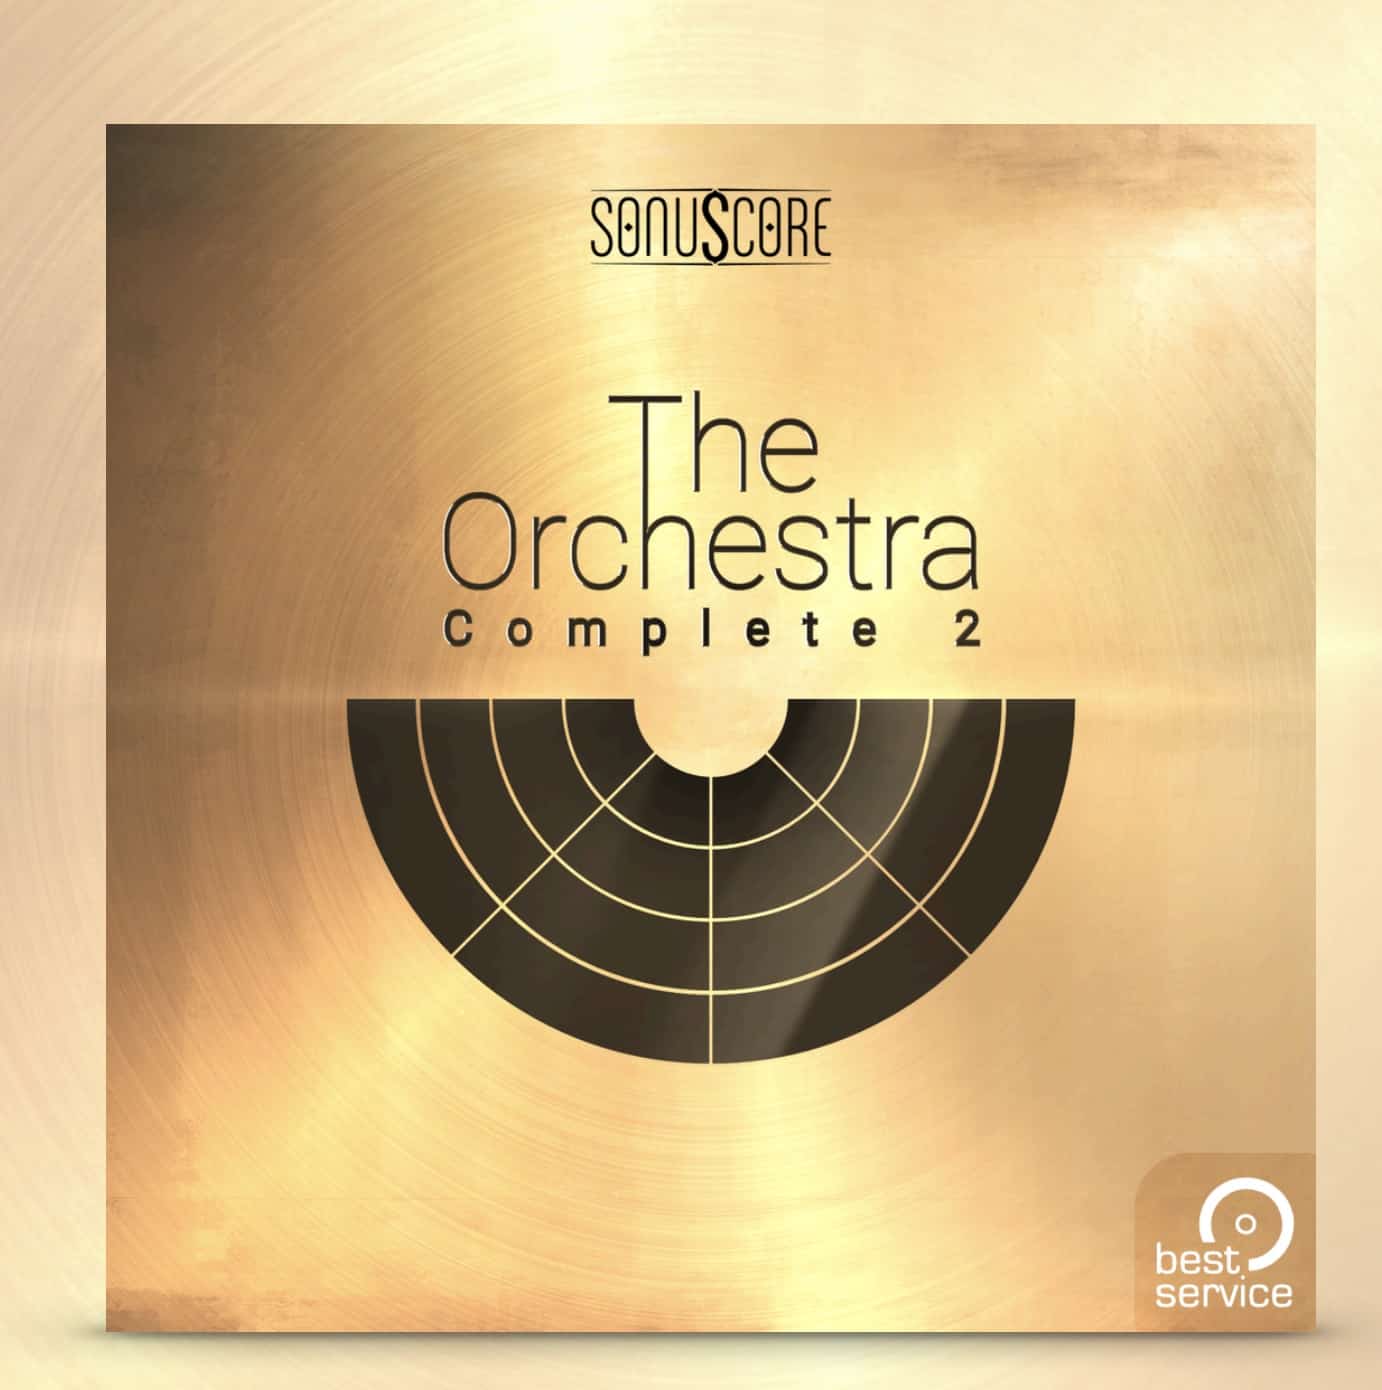 THE-ORCHESTRA-COMPLETE-2-THE-ORCHESTRA-HAS-EVOLVED